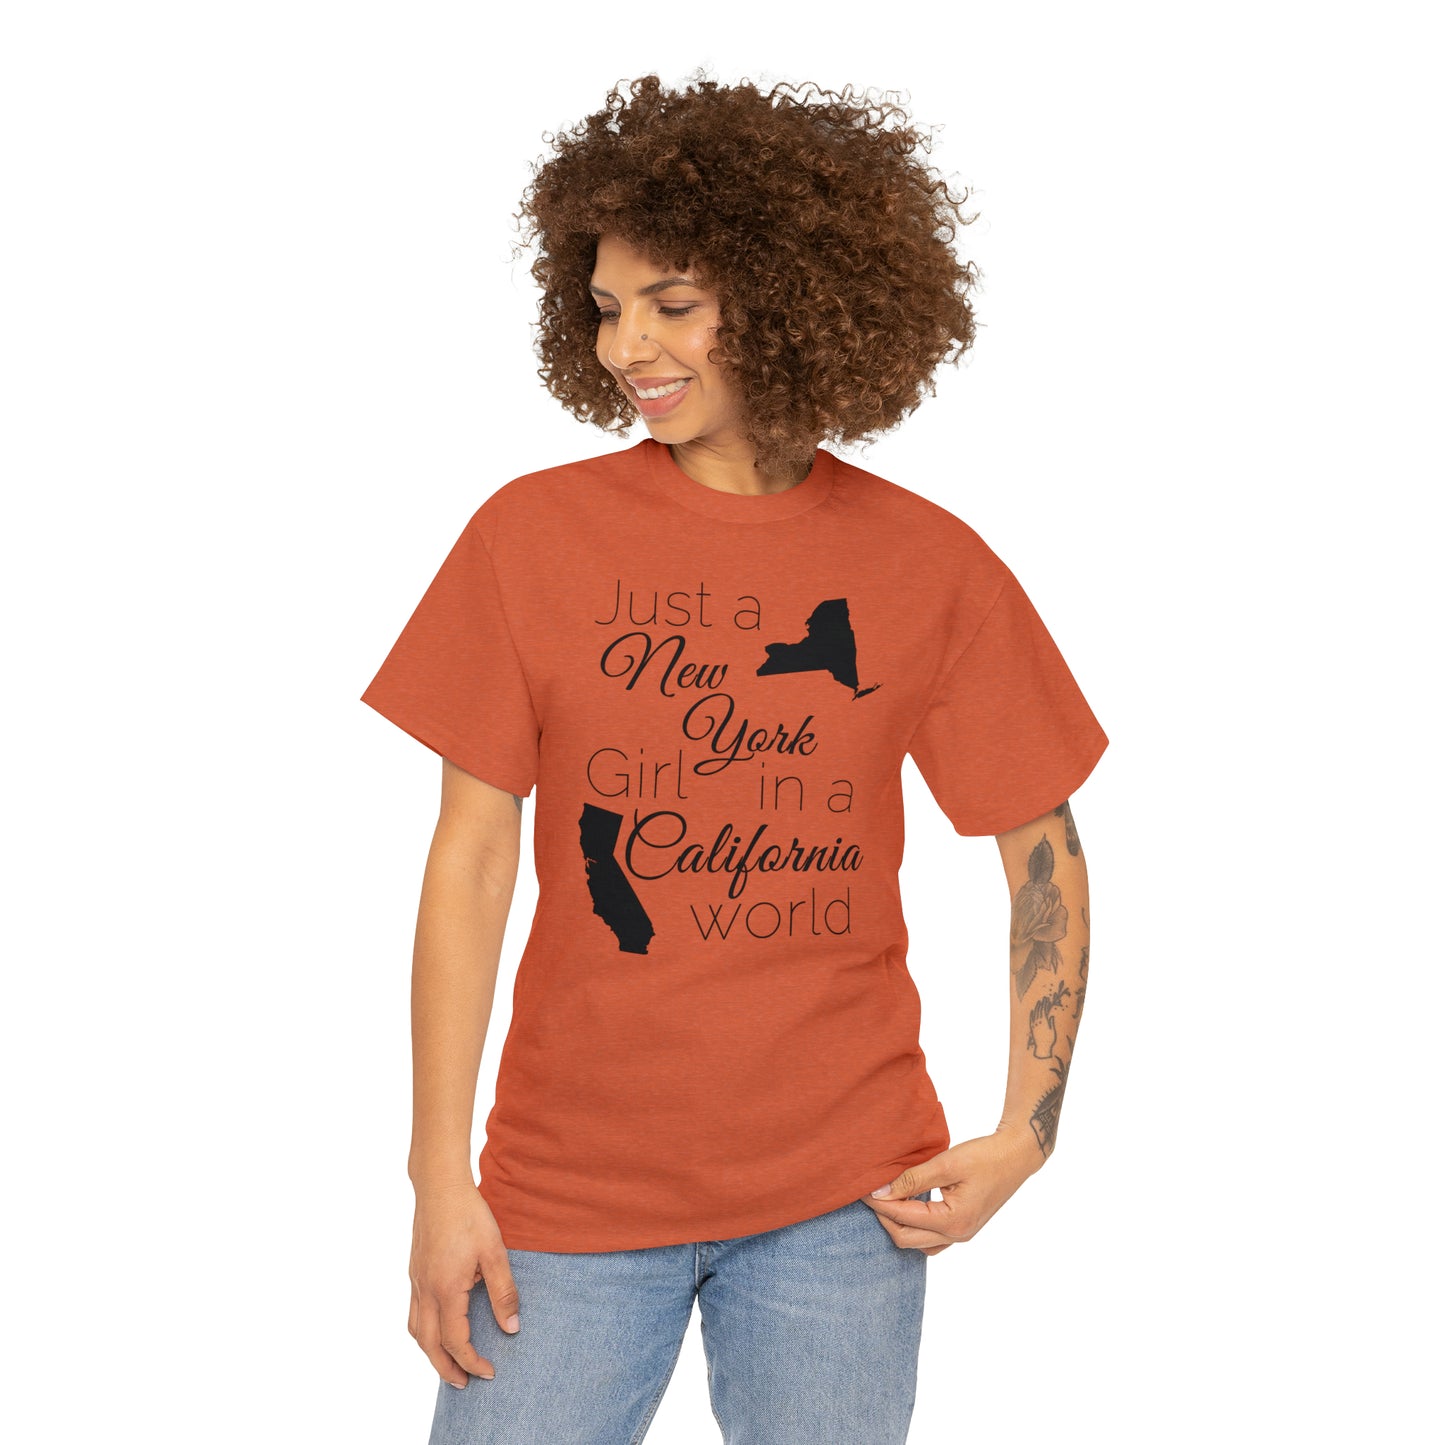 Just a New York Girl in a California World Unisex Heavy Cotton Tee